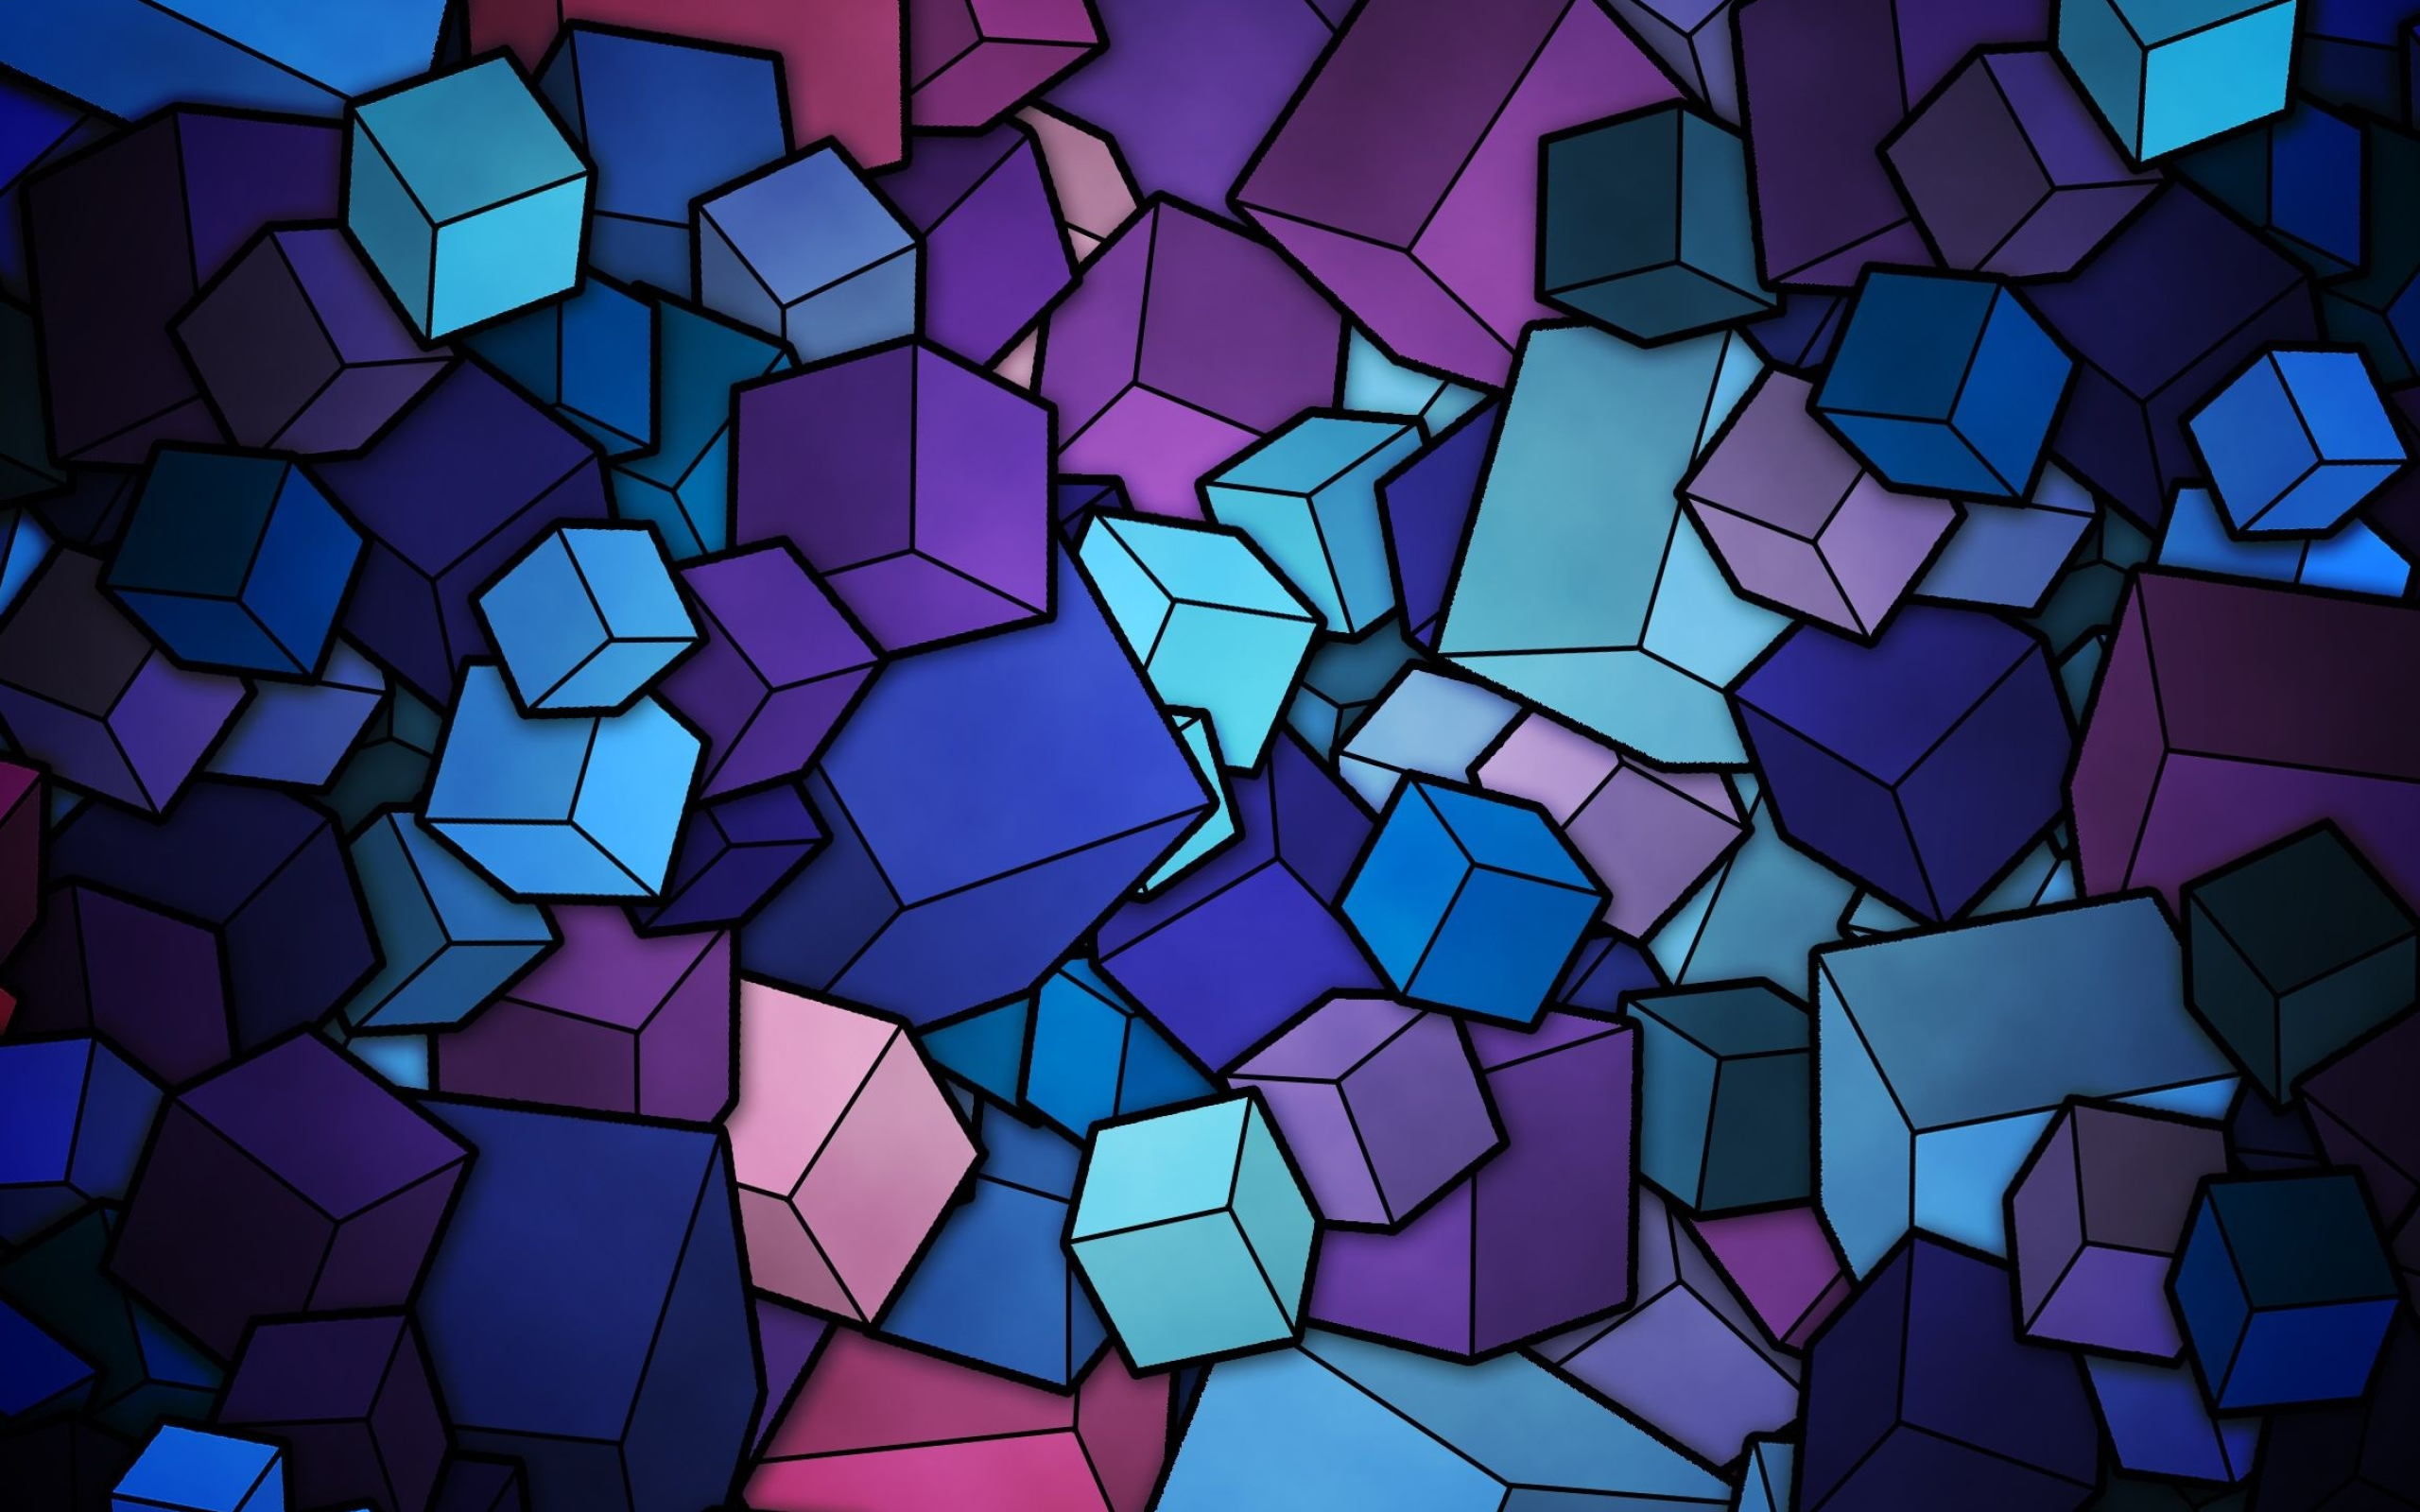 3D cube ocean, Abstract blue blocks, Digital geometry, collection, Prism-like reflections, 2560x1600 HD Desktop